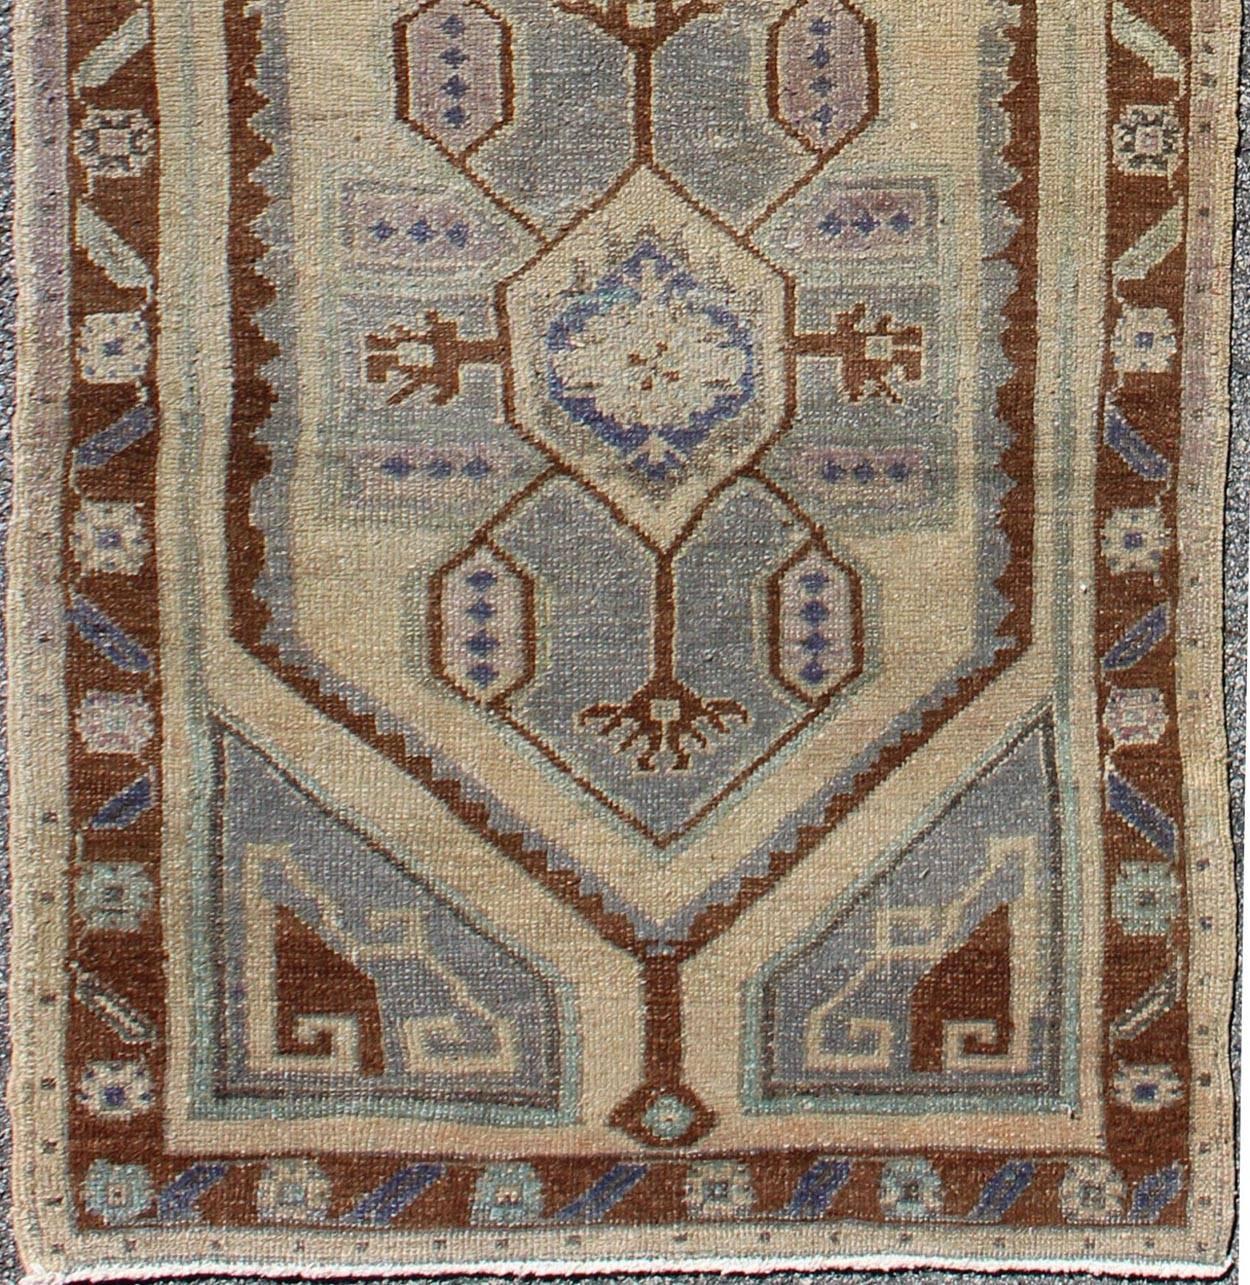 This vintage Turkish Oushak carpet (circa mid-20th century) features a tribal, central dual-medallion design, as well as patterns of geometric elements in the surrounding field and borders. The rug's qualities are enhanced by its particularly soft